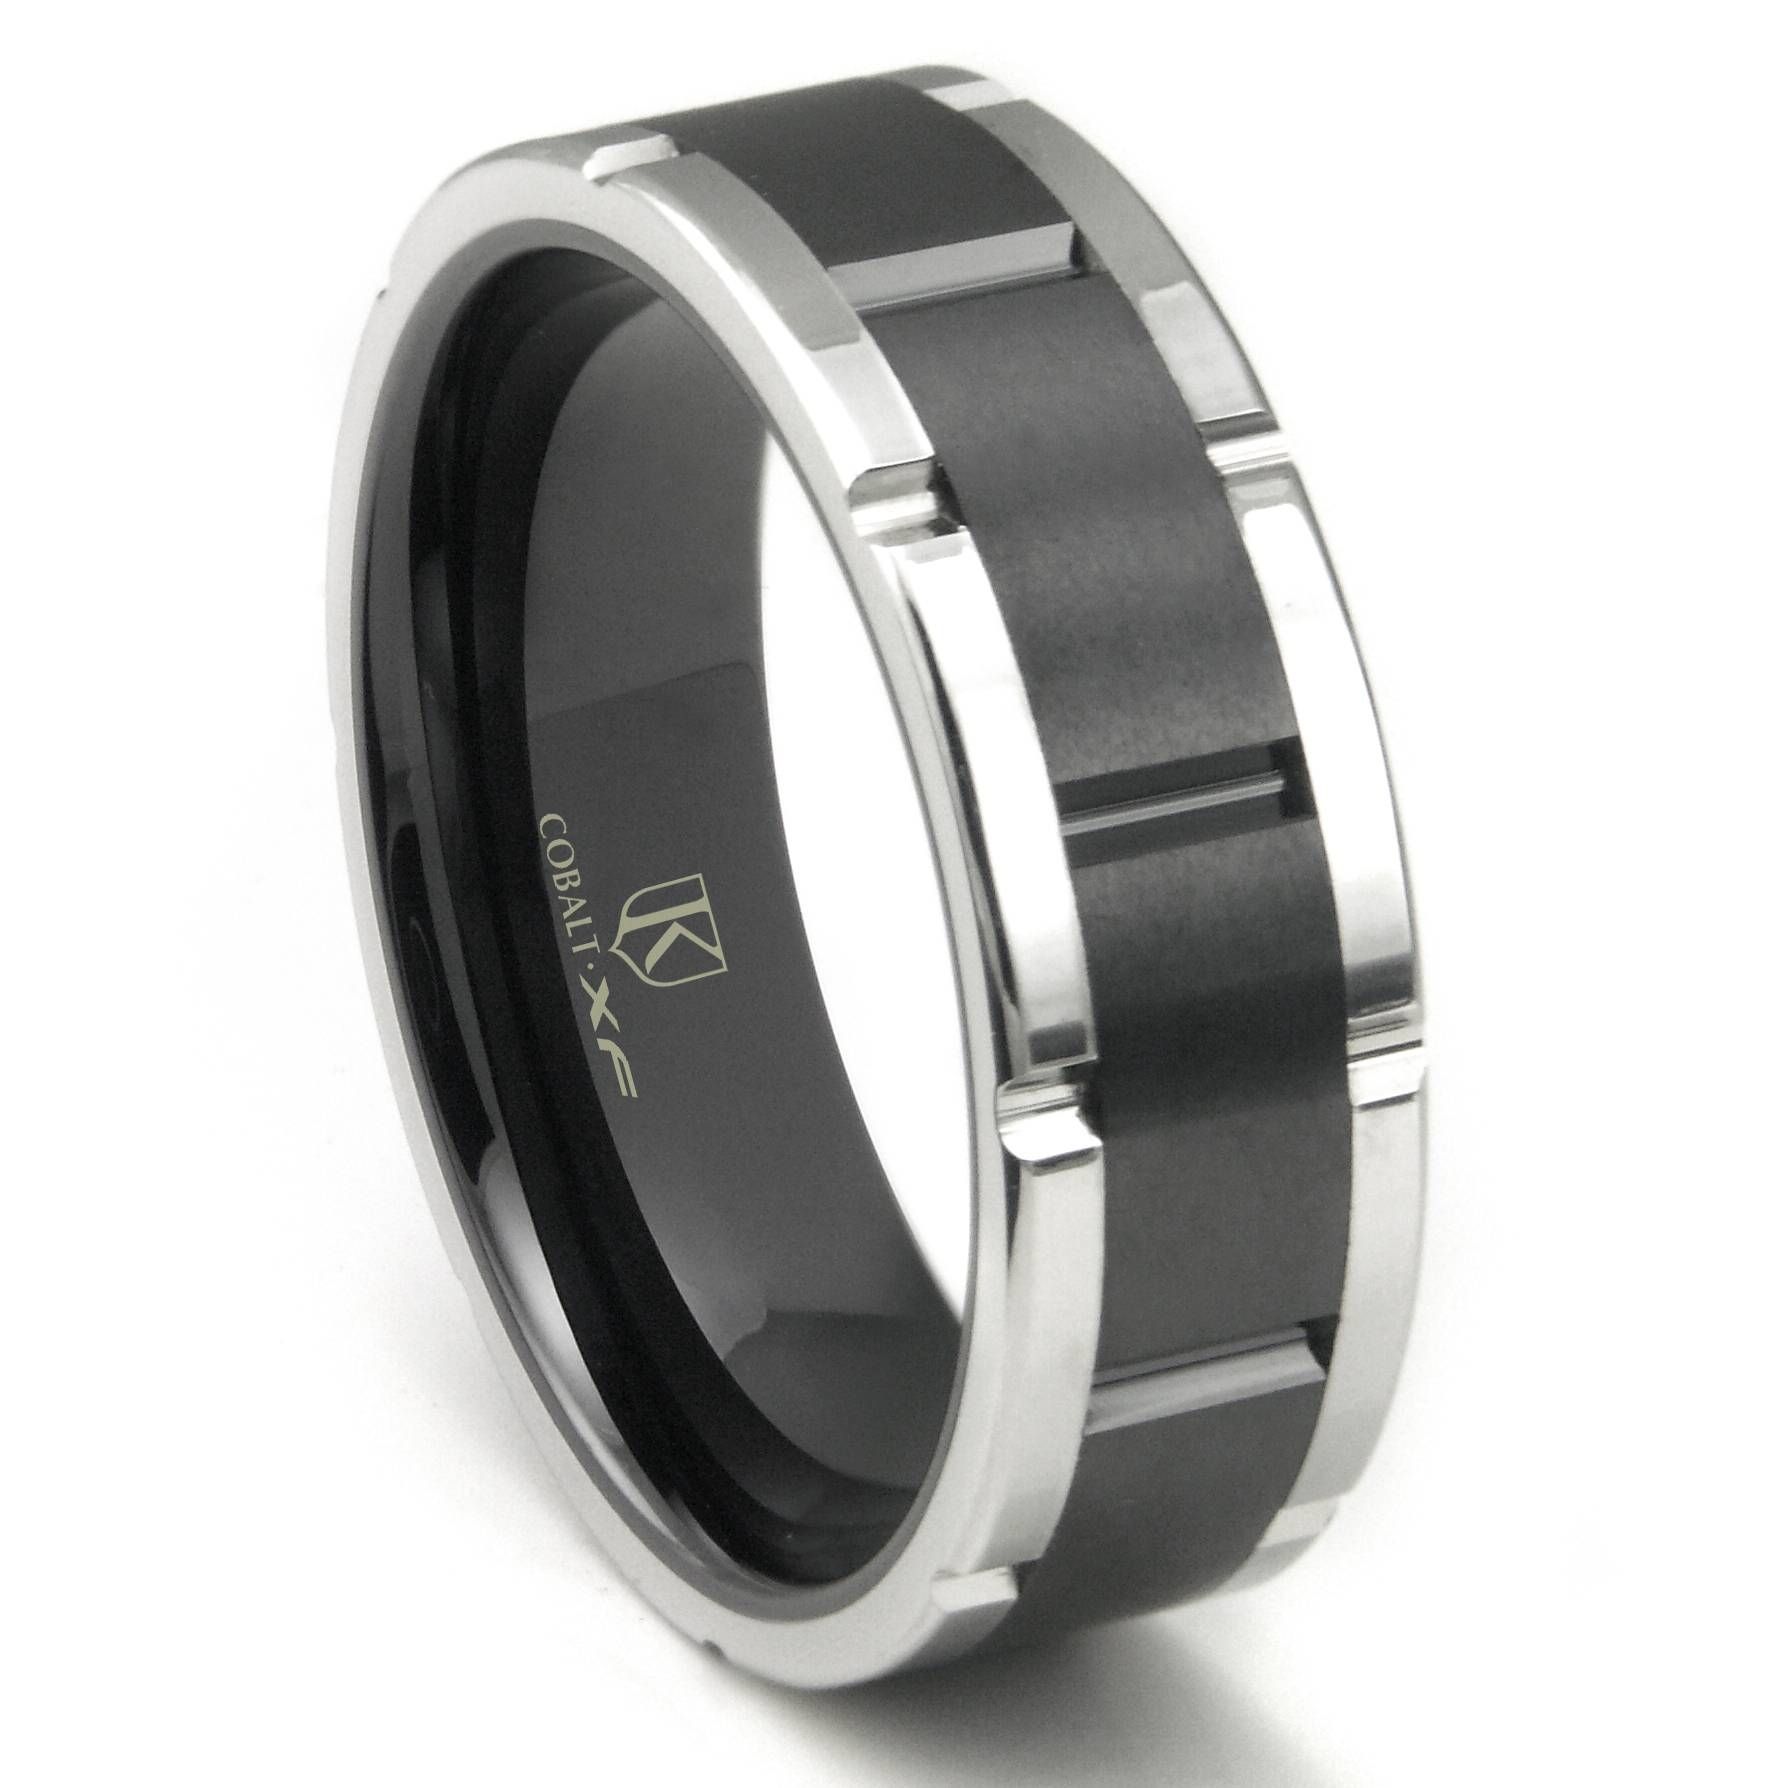 Cobalt Xf Chrome 8mm Two Tone Matte Finish Center Wedding Band Ring Within Cobalt Mens Wedding Rings (View 1 of 15)